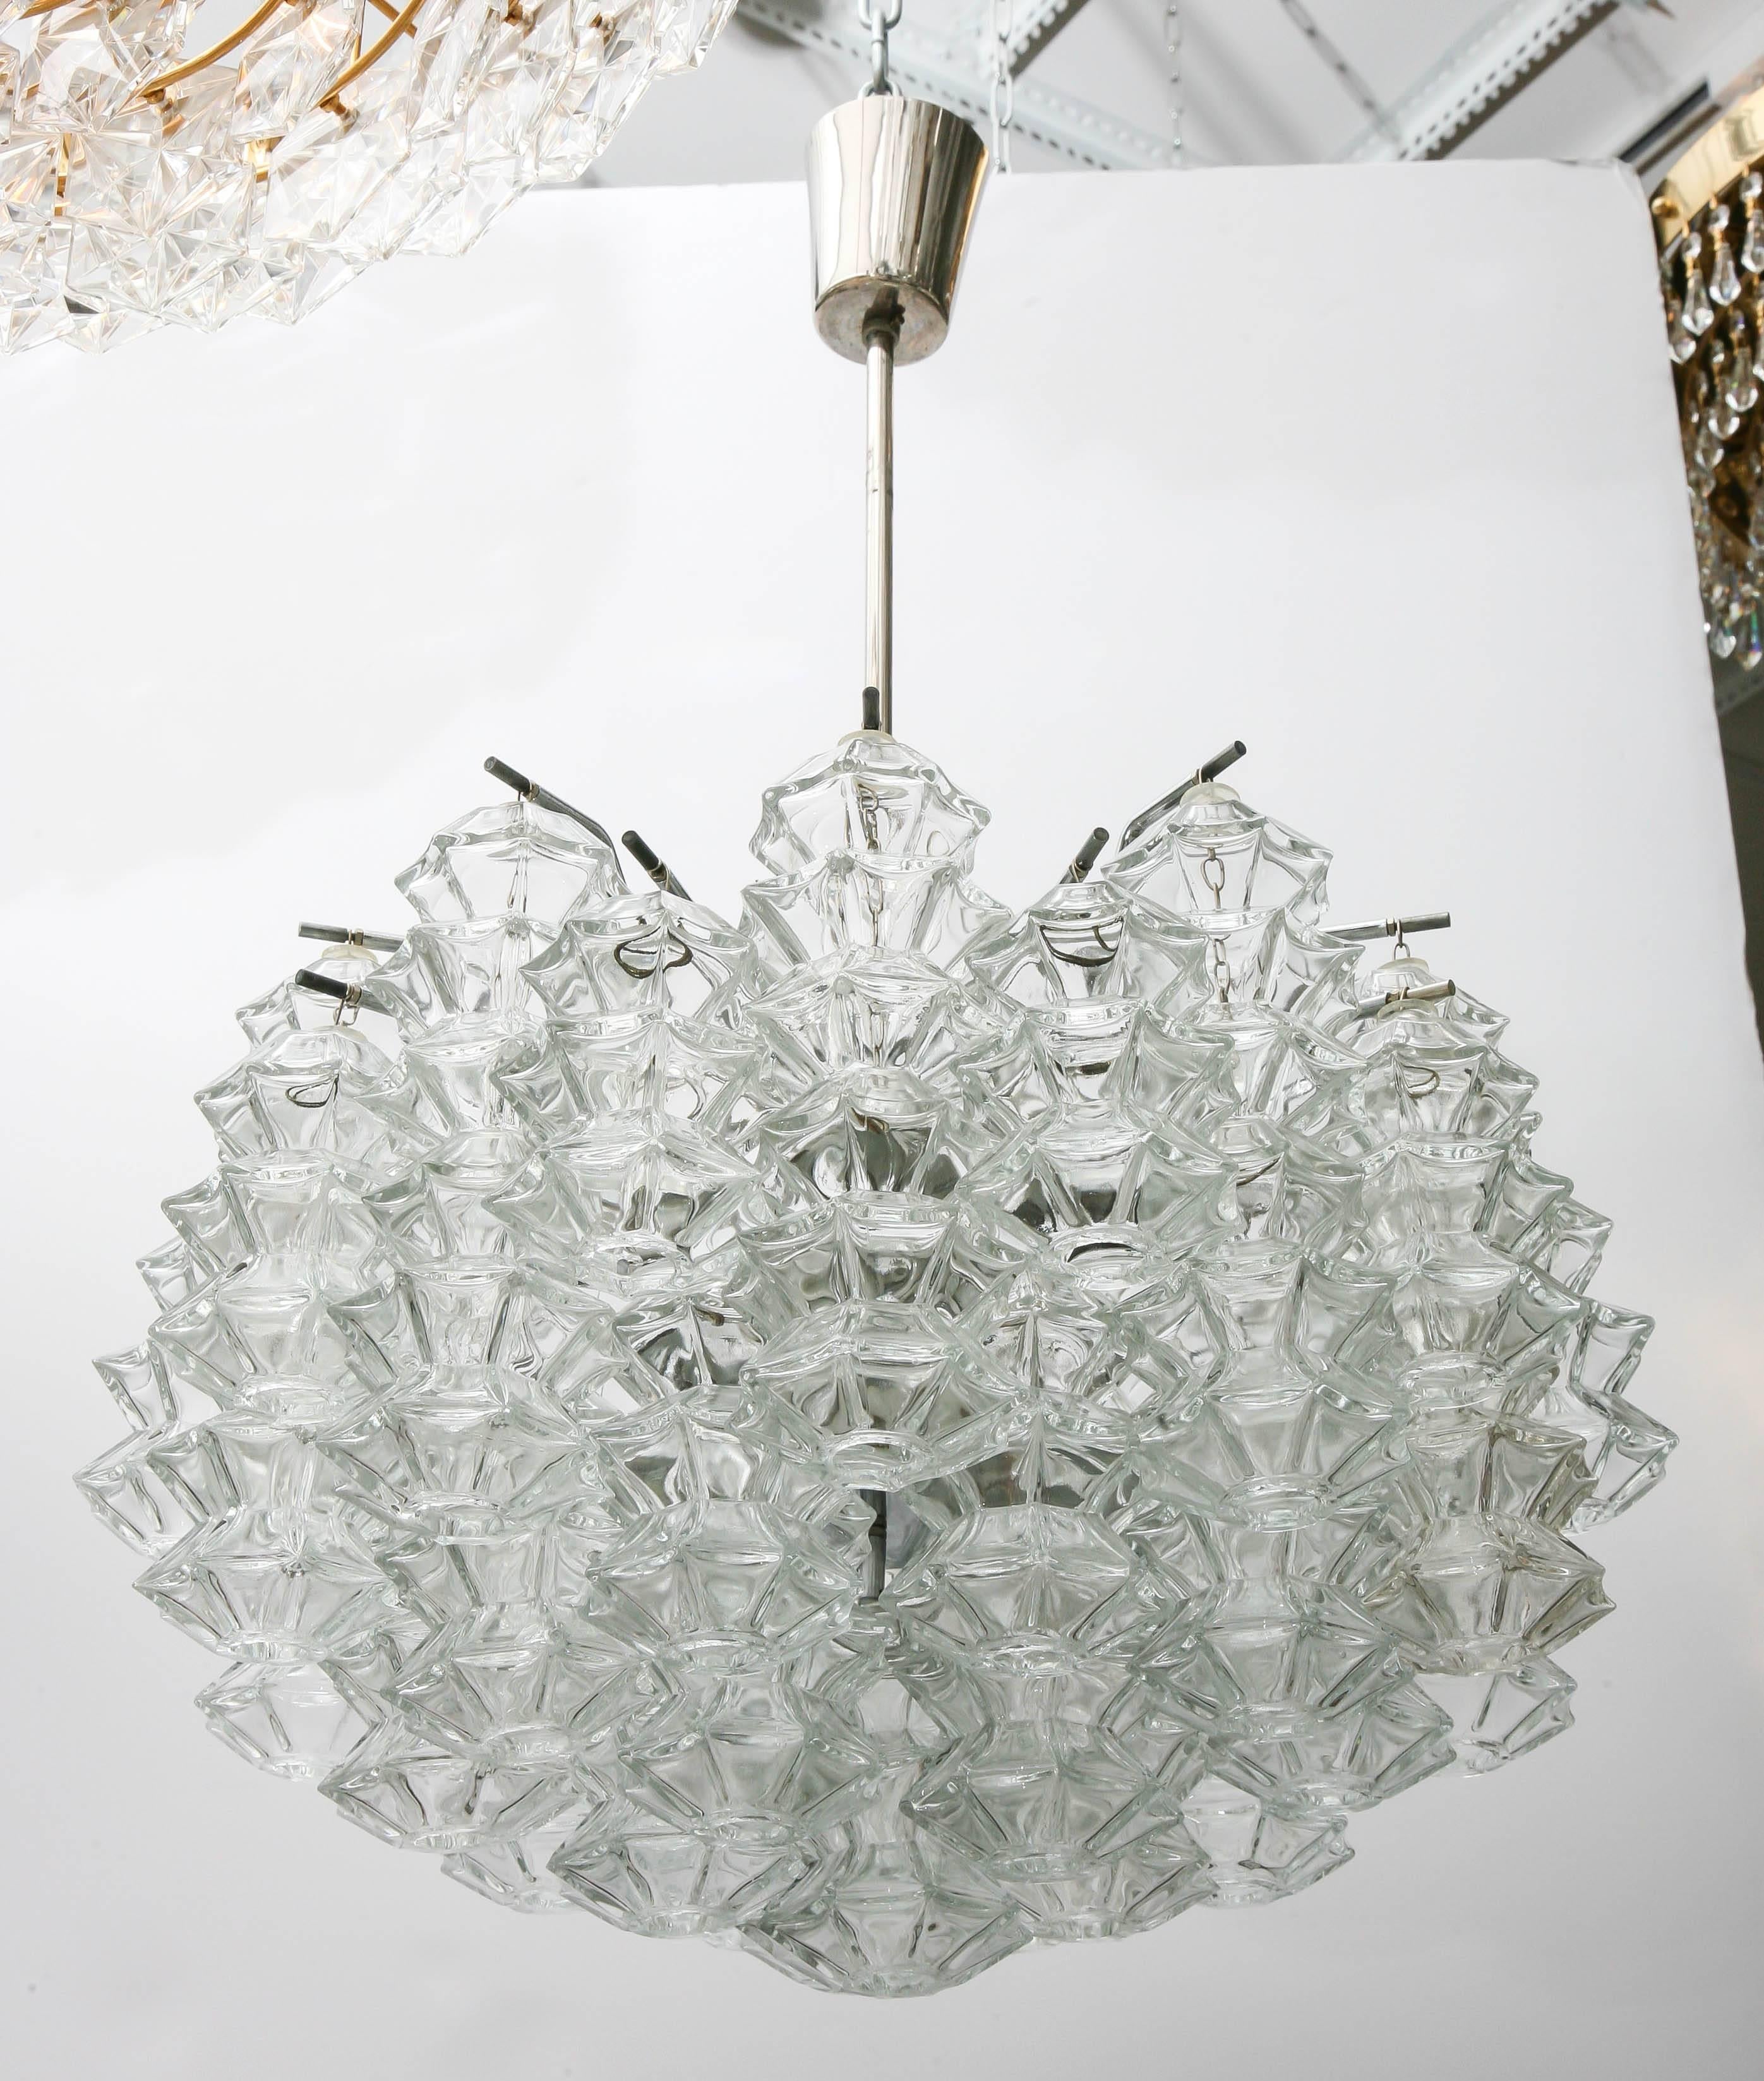 Vintage Kalmar glass chandelier with ten light sockets. The armature is chrome with original canopy.